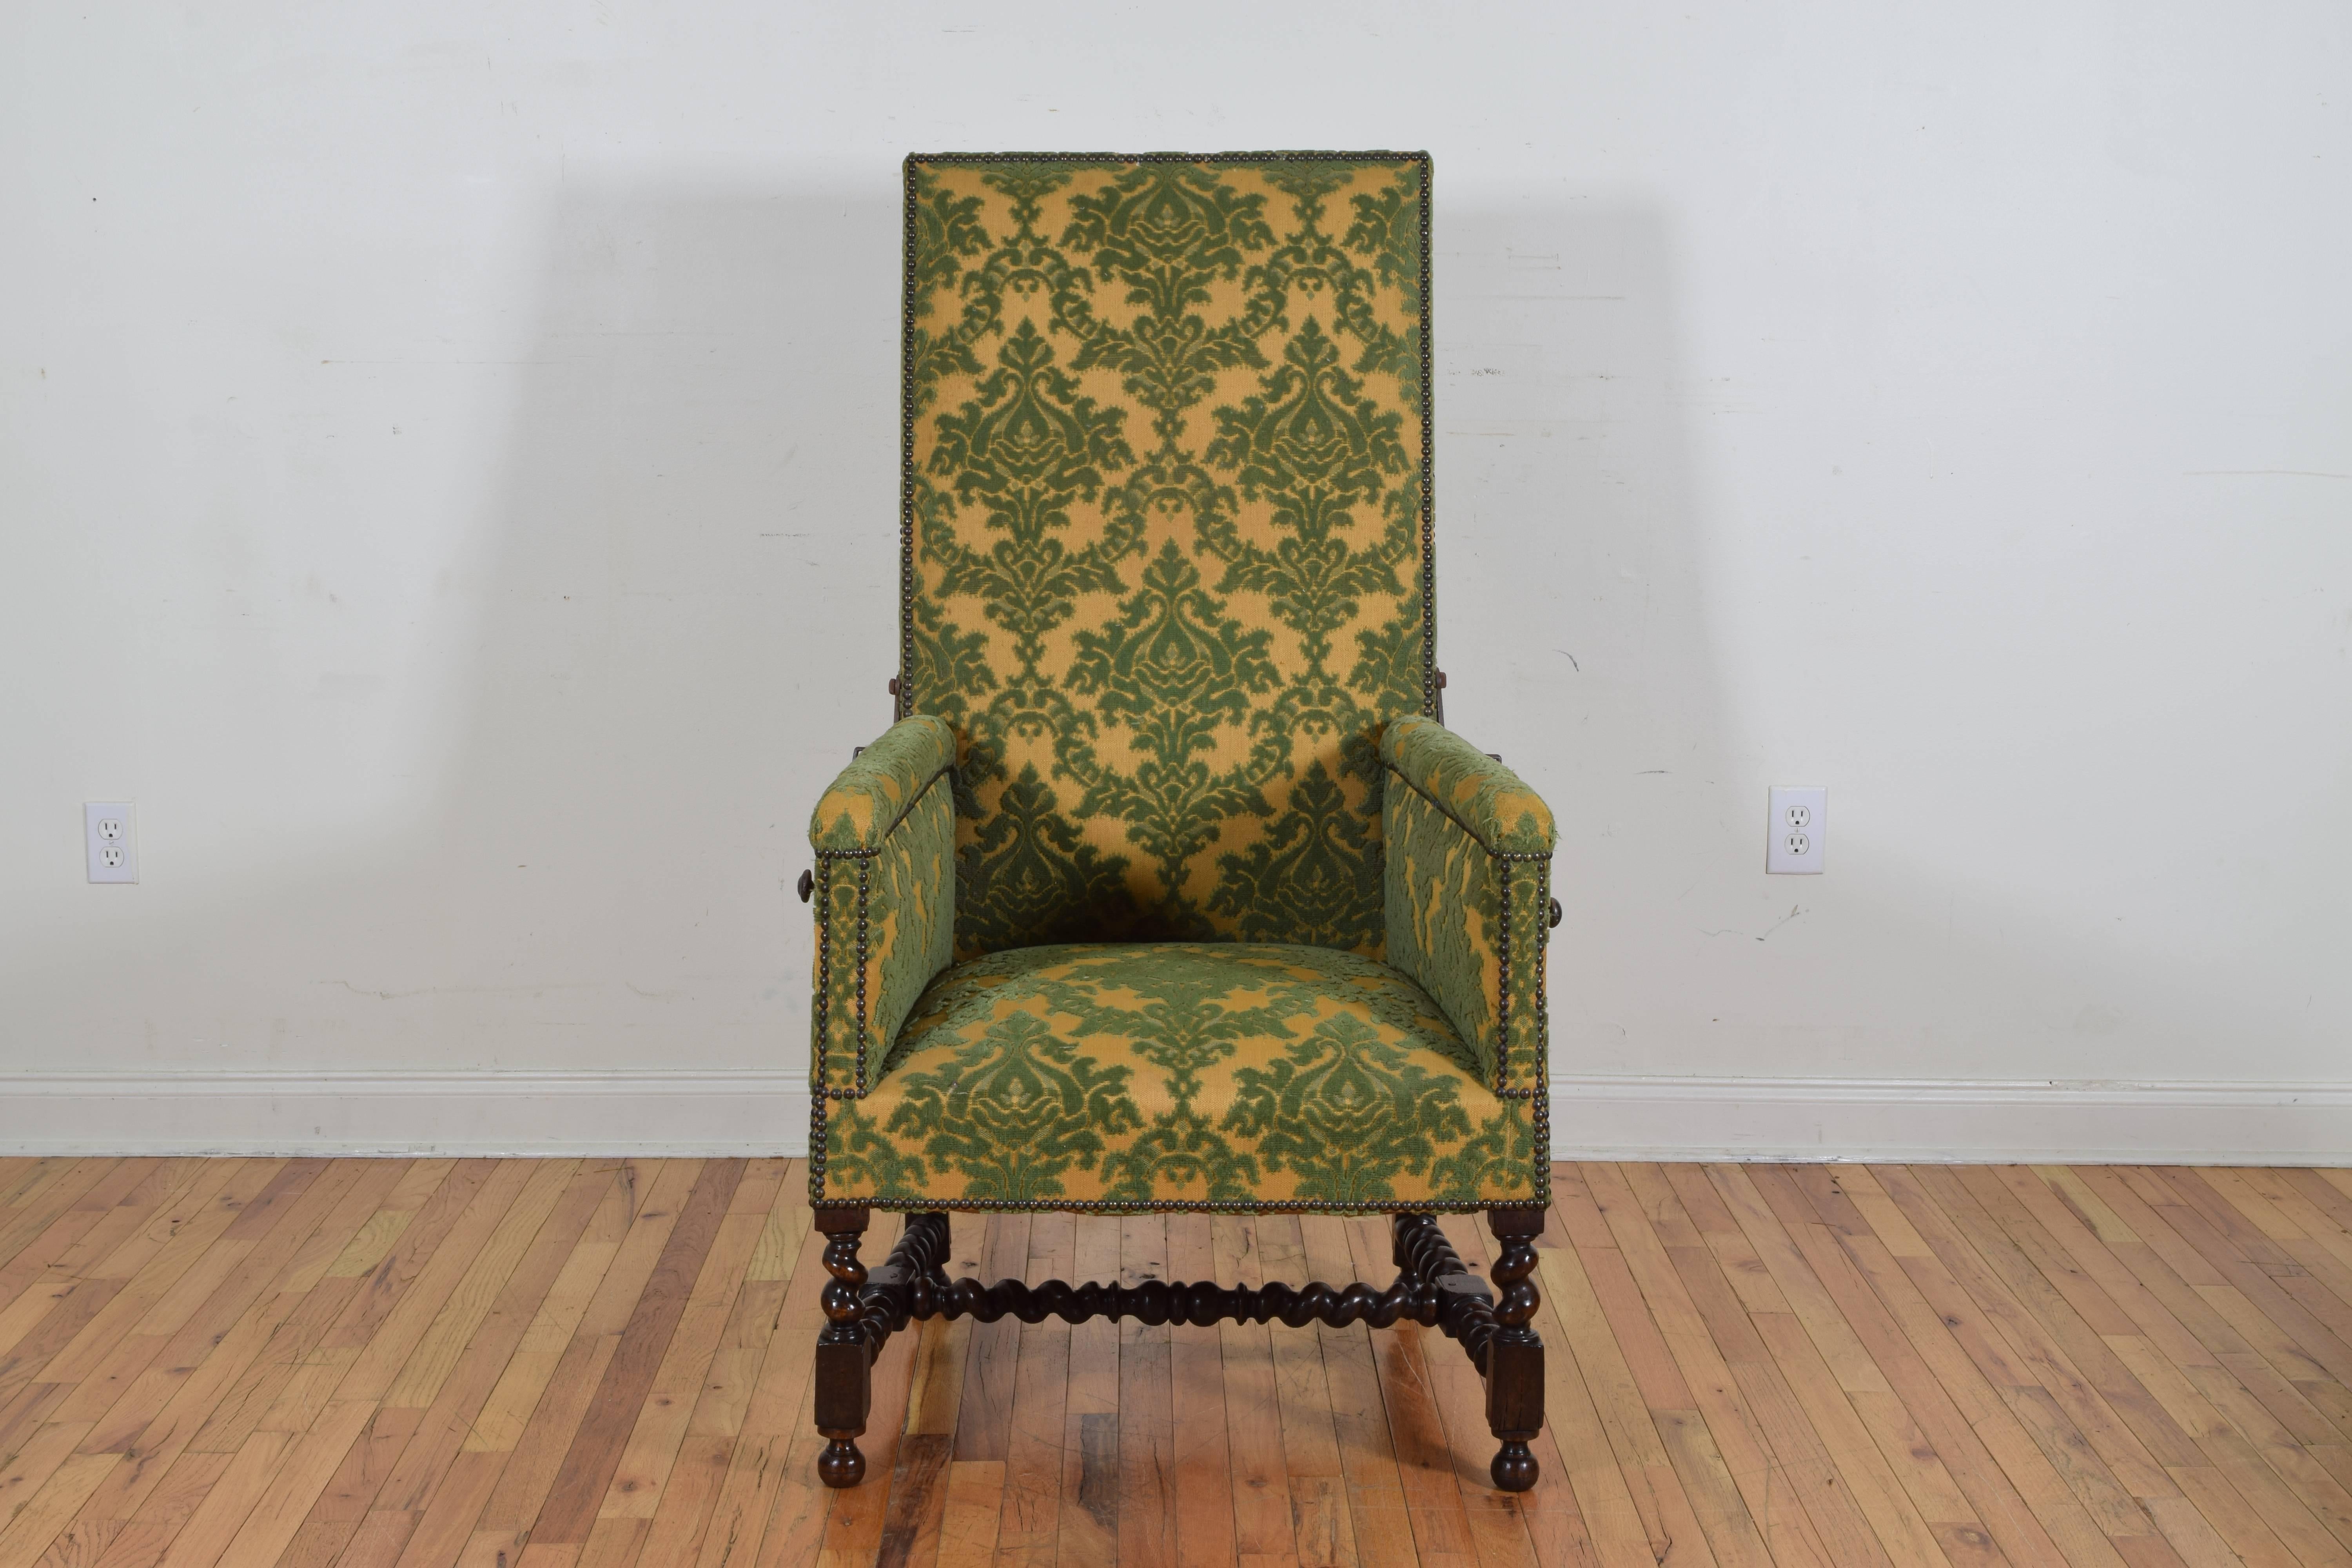 of larger scale and having a rectangular backrest, the frame with enclosed sides and a tight seat all upholstered in an antique velvet face damask, the side mounted iron ratchet adjustable to 8 positions, having splayed carved rear legs and spiral